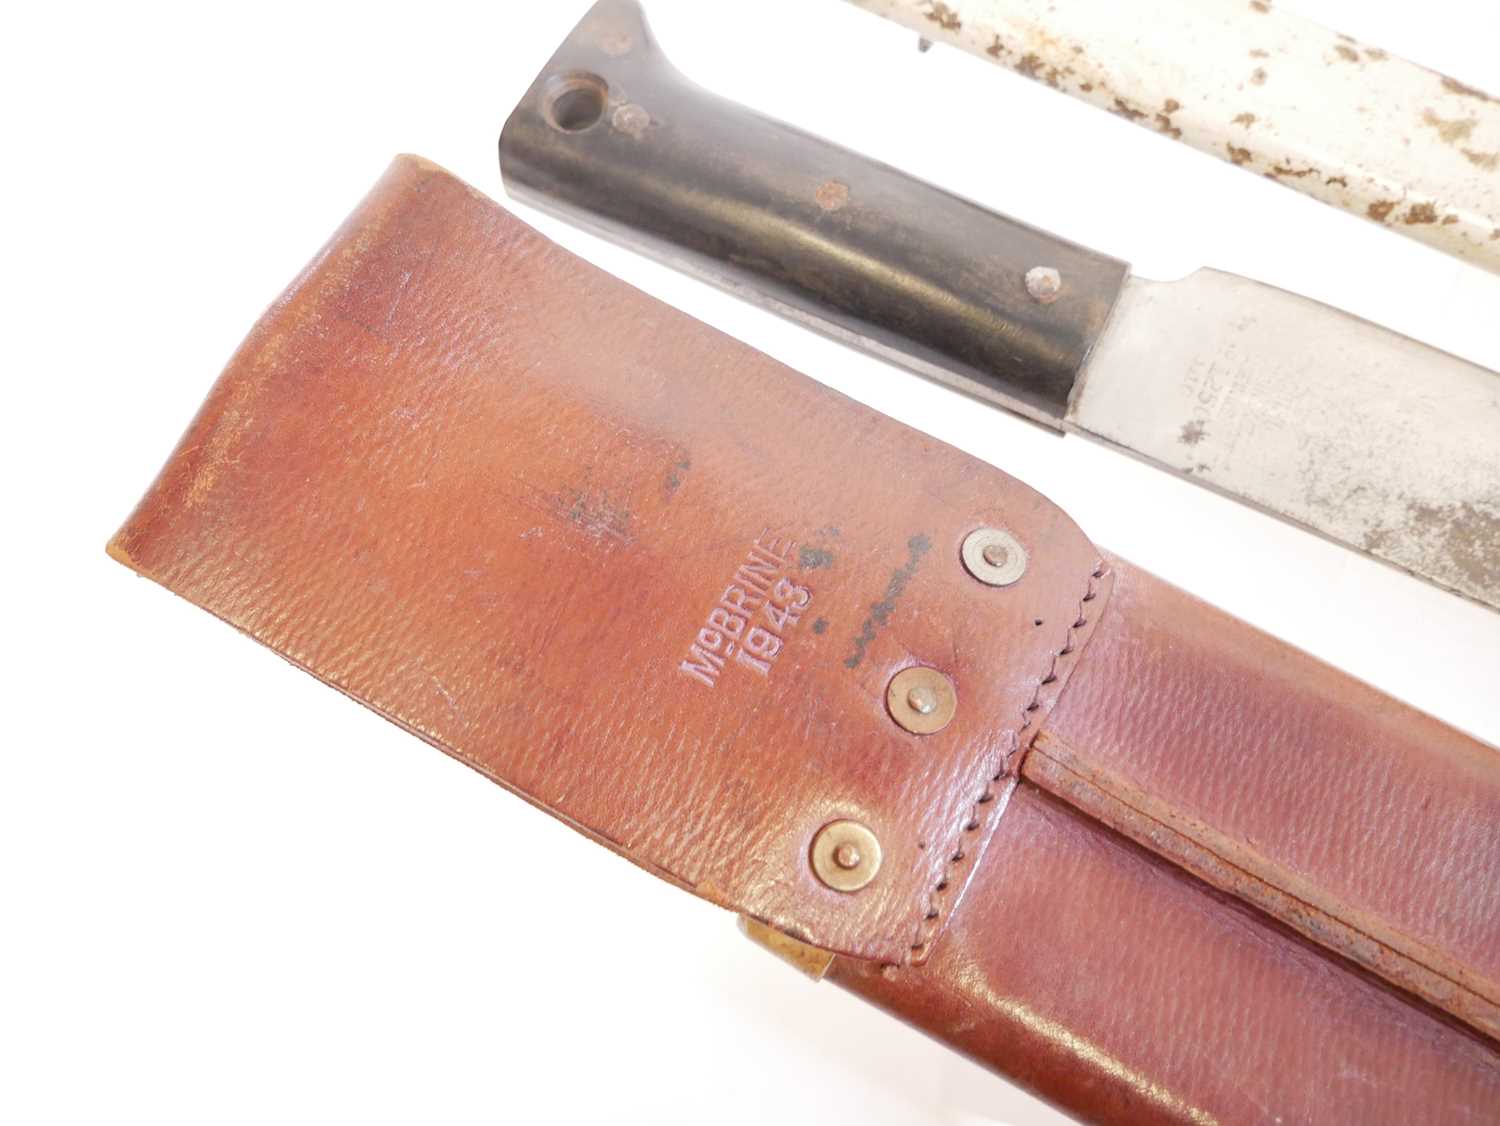 Legitimus Collins machete the ricasso stamped with maker mark and 1940 date, the leather scabbard - Image 8 of 9